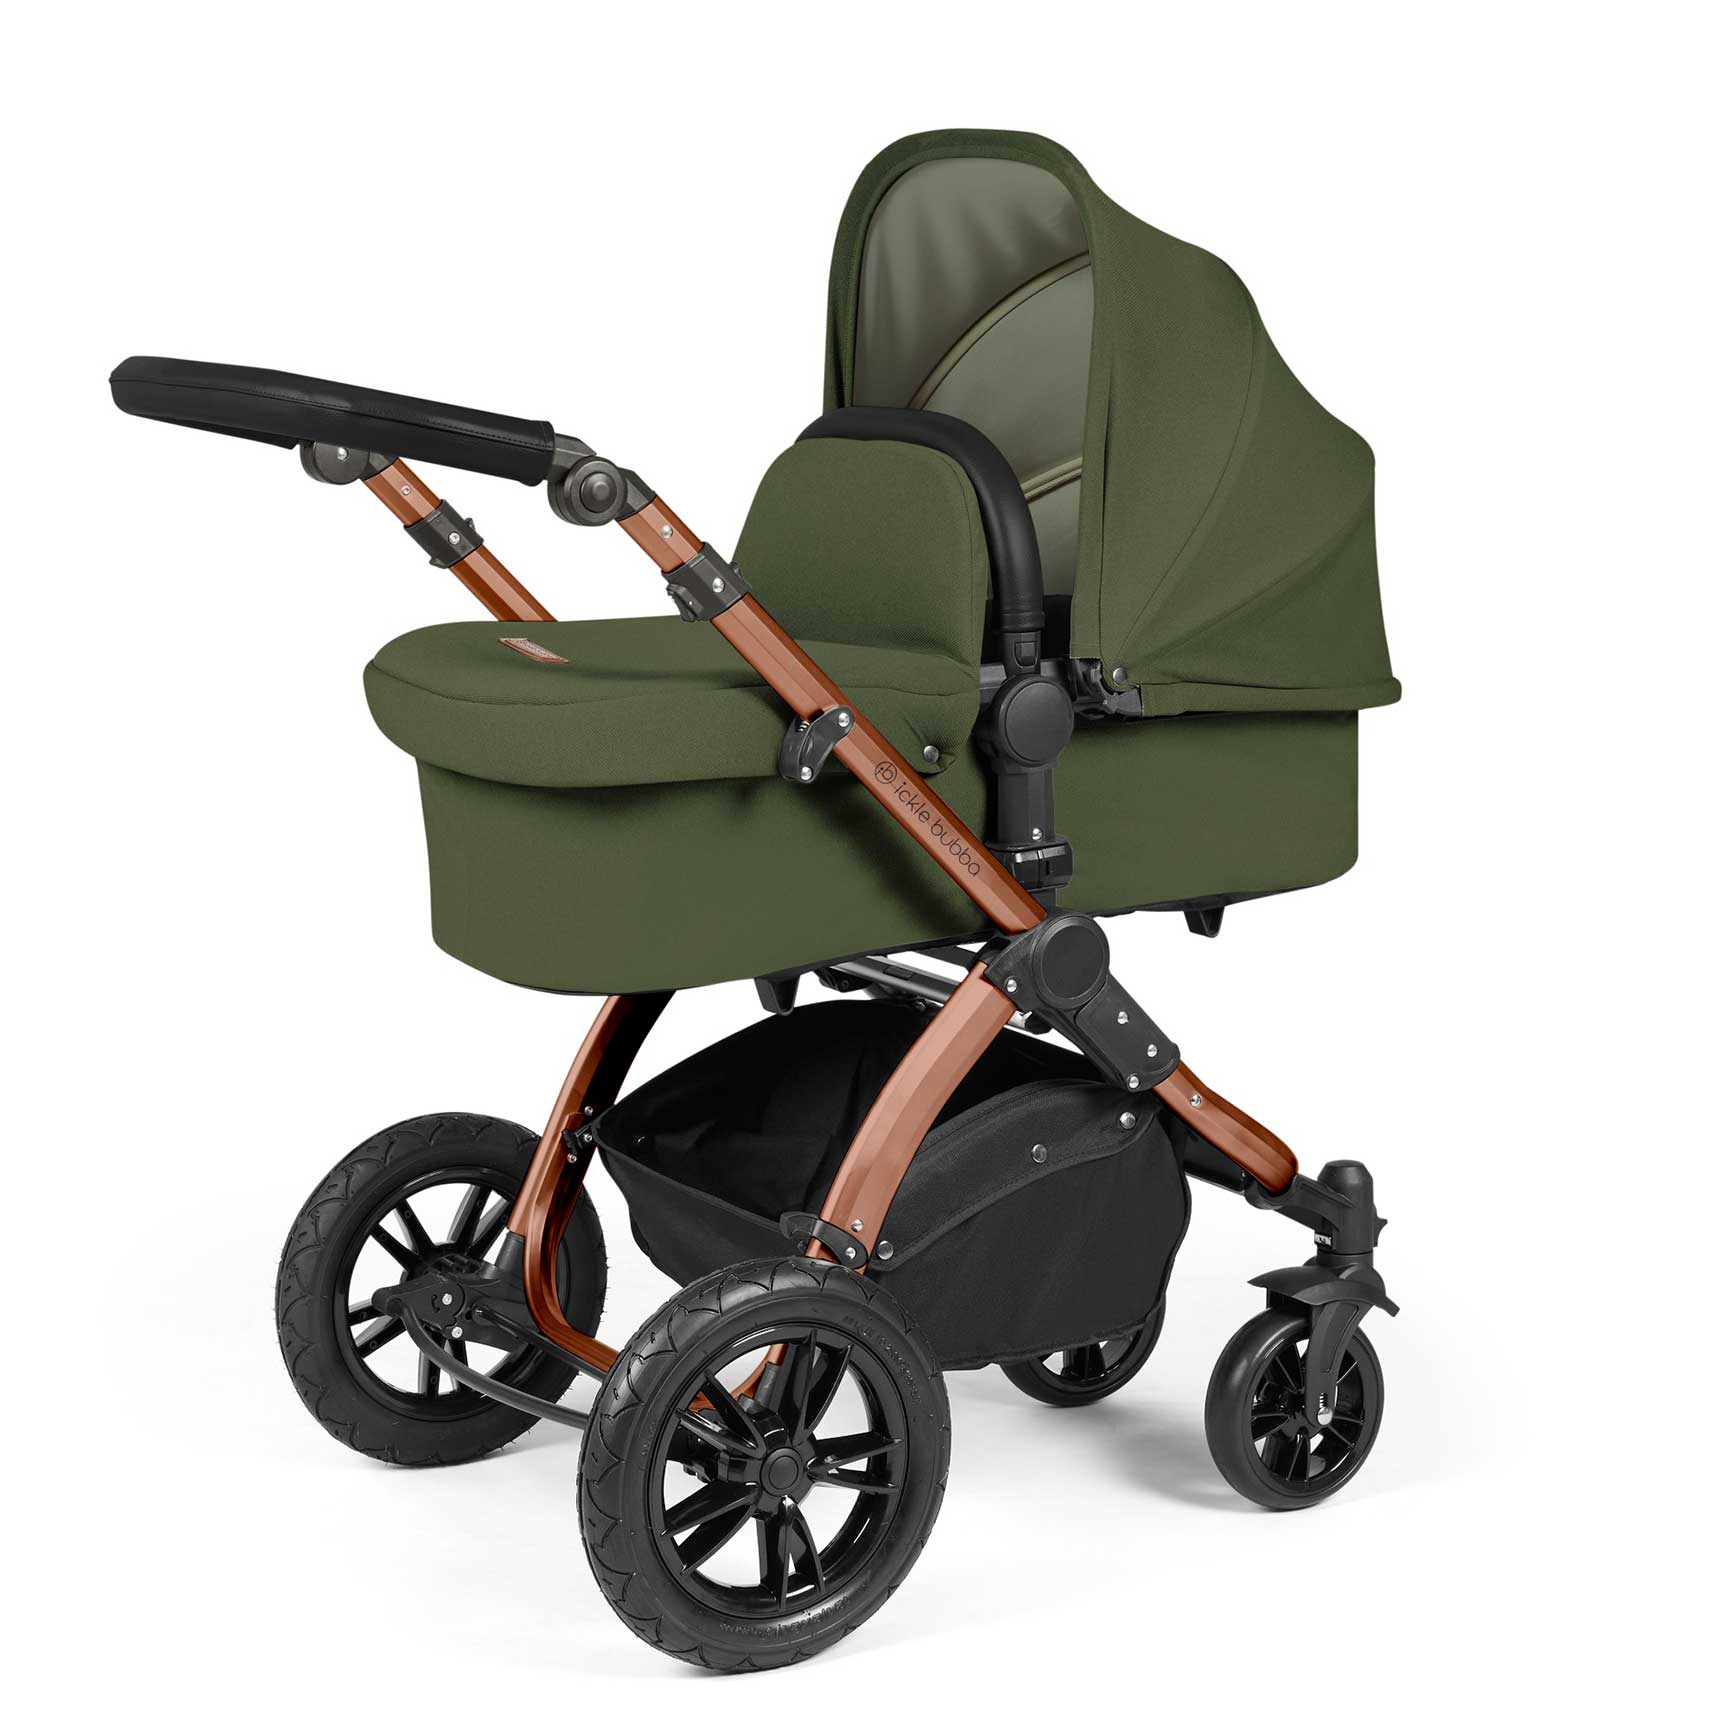 Ickle Bubba Stomp Luxe All-in-One Travel System with Isofix Base in Bronze/Woodland/Black Travel Systems 10-011-300-140 5056515026634